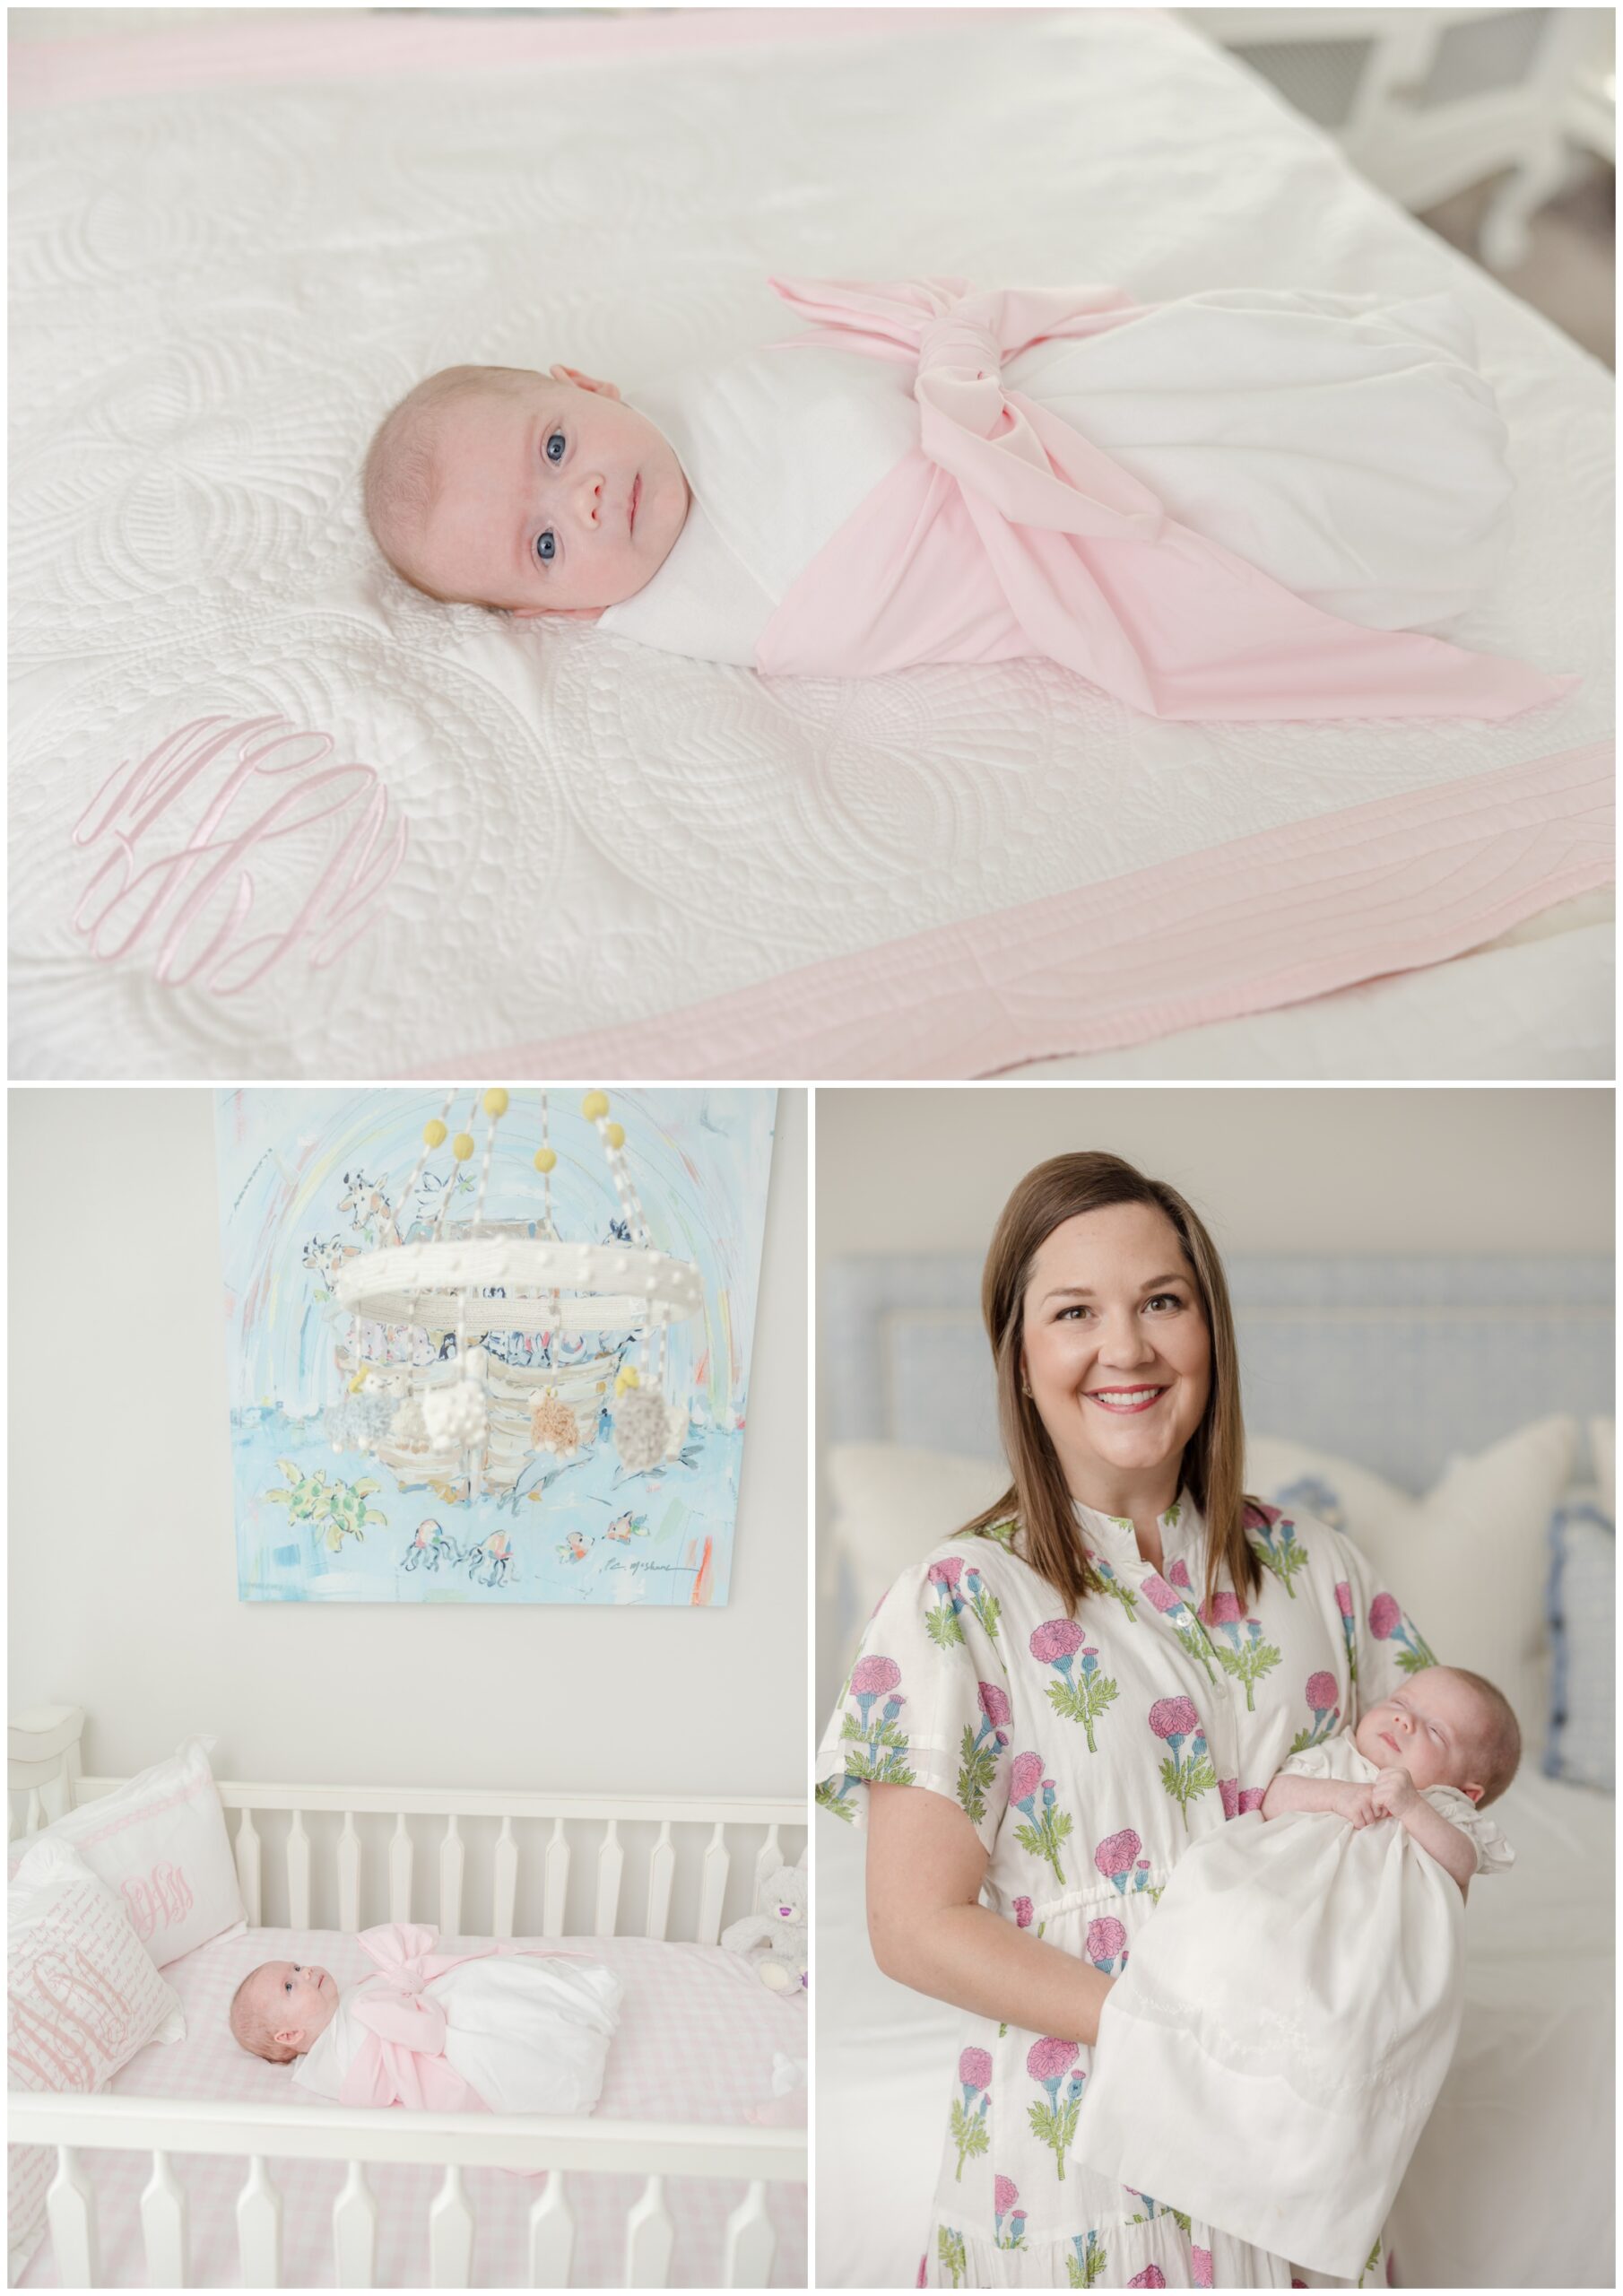 Photos of a newborn baby in her nursery wearing a pink Beaufort Bonnet Bow Swaddle.